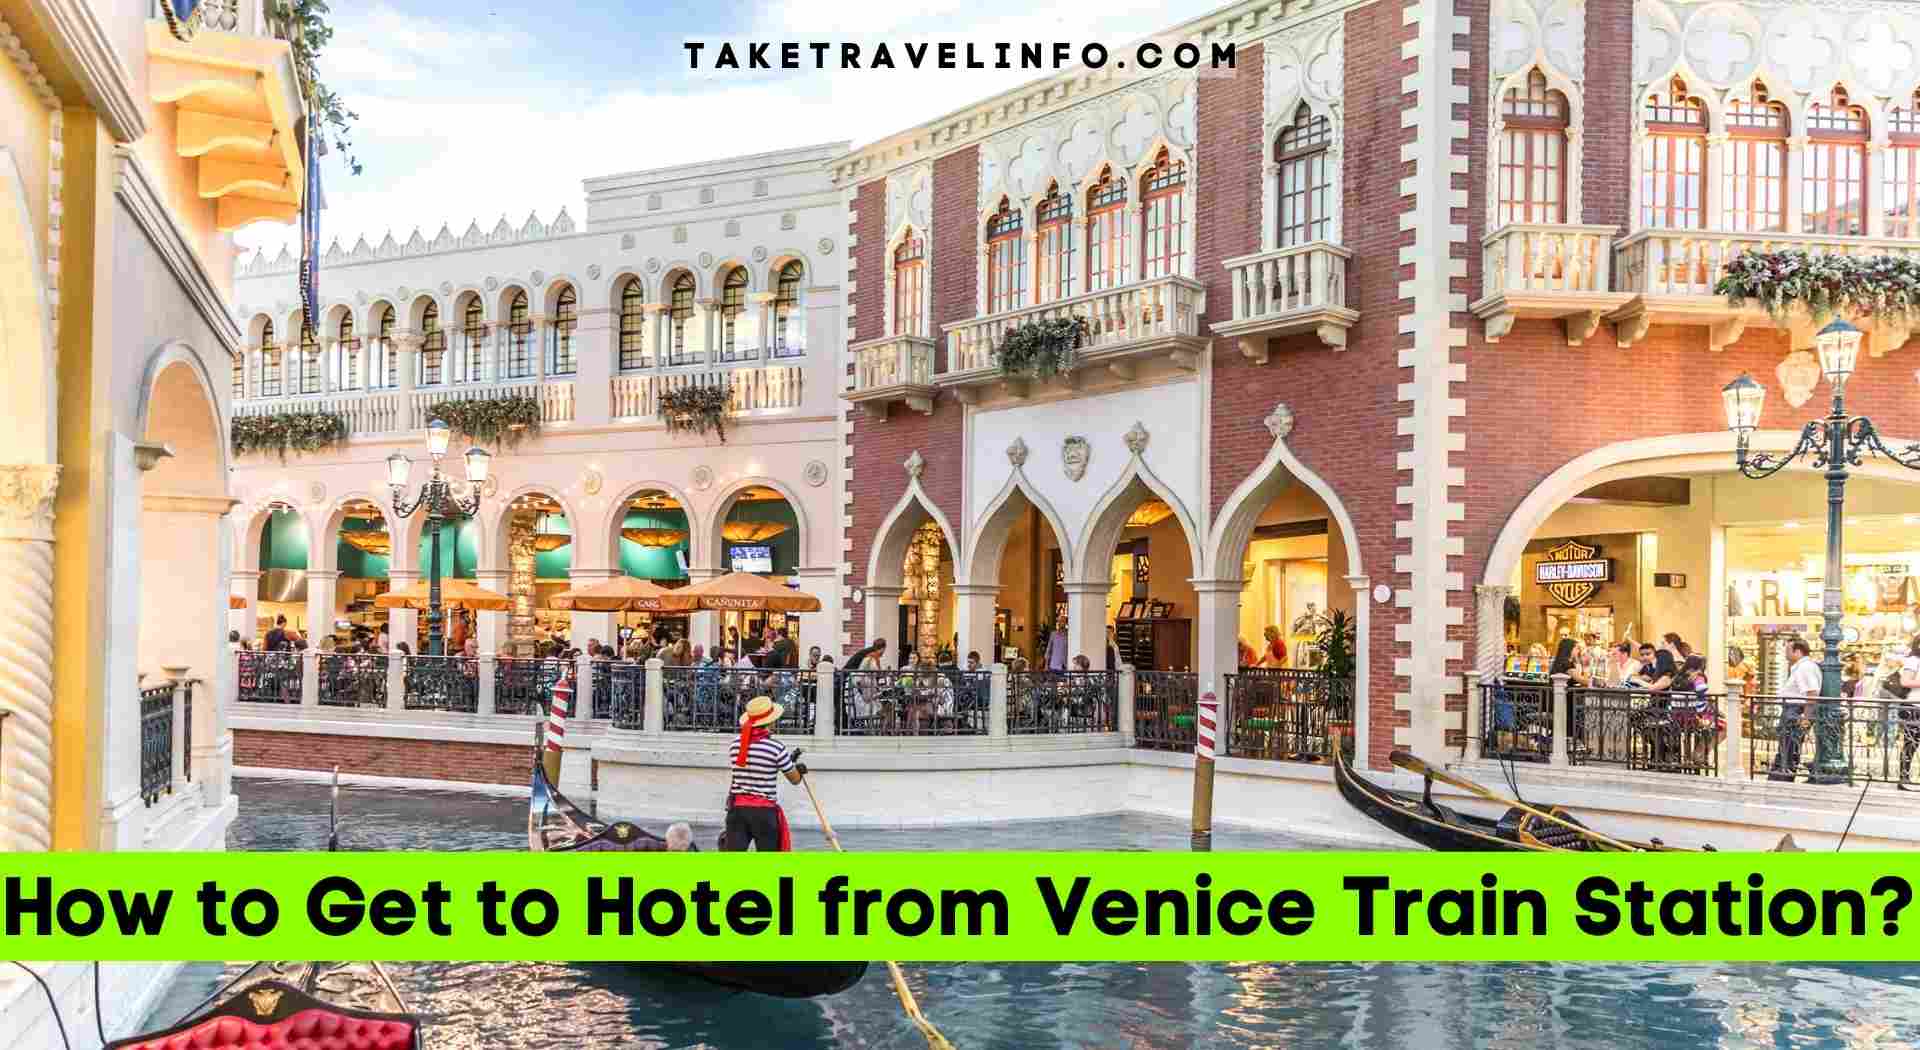 How to Get to Hotel from Venice Train Station?